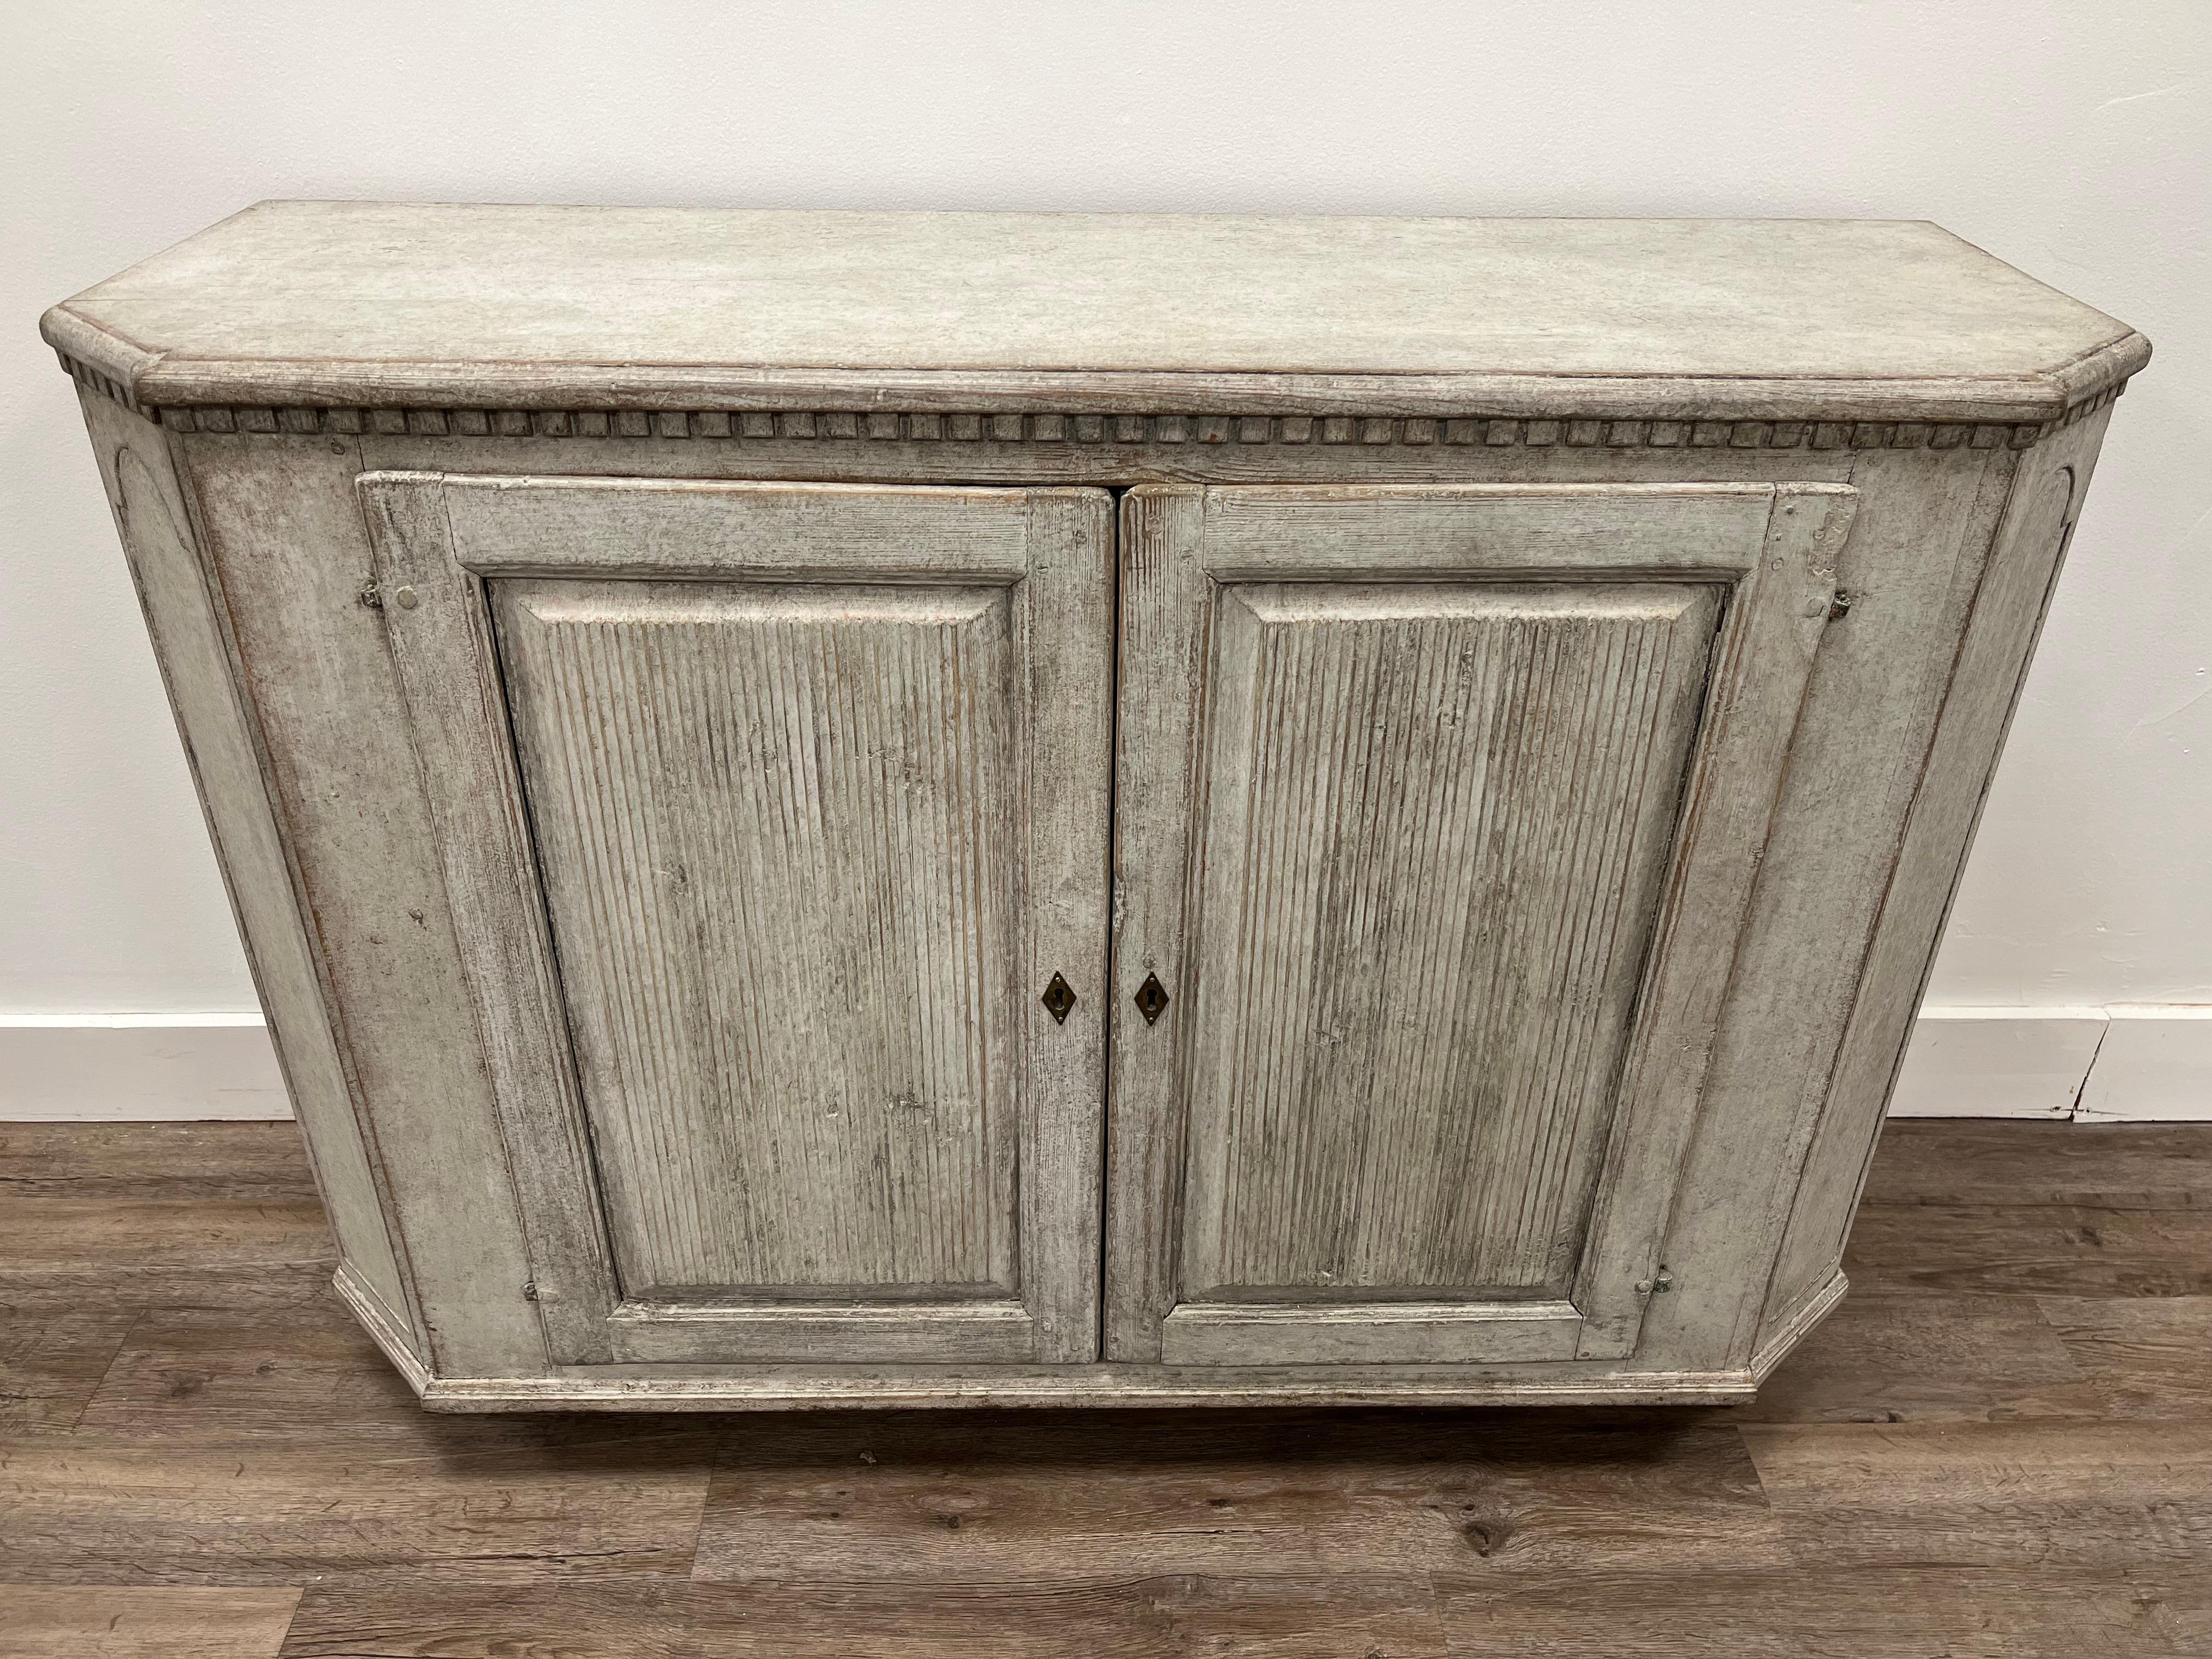 A provincial Late Gustavian sideboard with dental frieze top and canted corners with recessed design. Vertically reeded door fronts open to two large shelves. Sits atop small tapered feet. Later grey exterior and soft yellow interior paint. Original